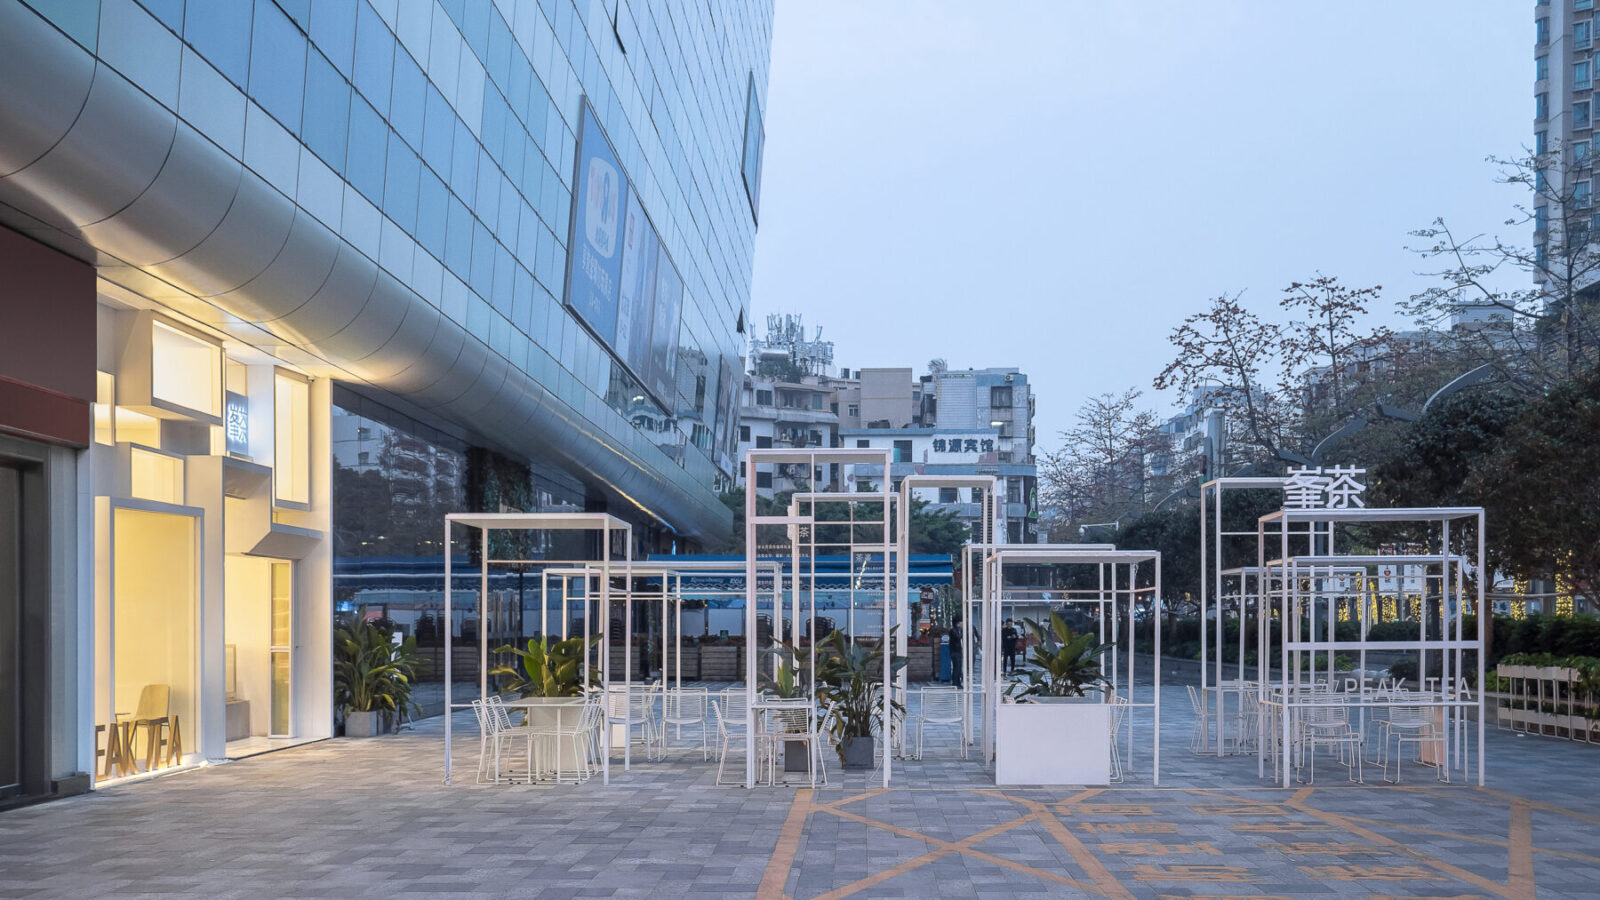 Archisearch Integrated Landscaping: Peak Tea in Shenzhen, China by Onexn Architects